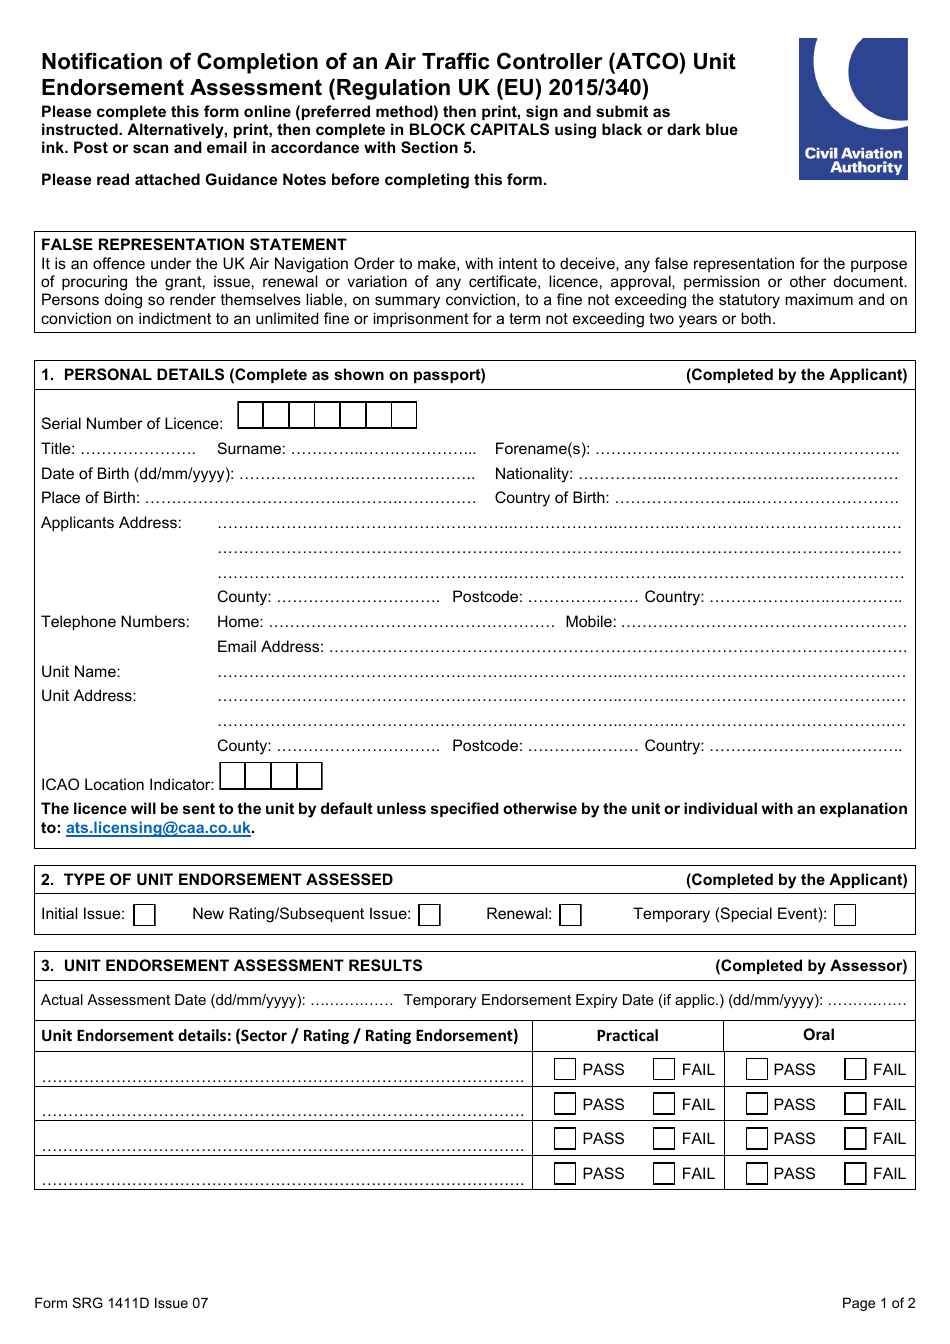 Form SRG1411D Notification of Completion of an Air Traffic Controller (Atco) Unit Endorsement Assessment (Regulation UK (Eu) 2015 / 340) - United Kingdom, Page 1